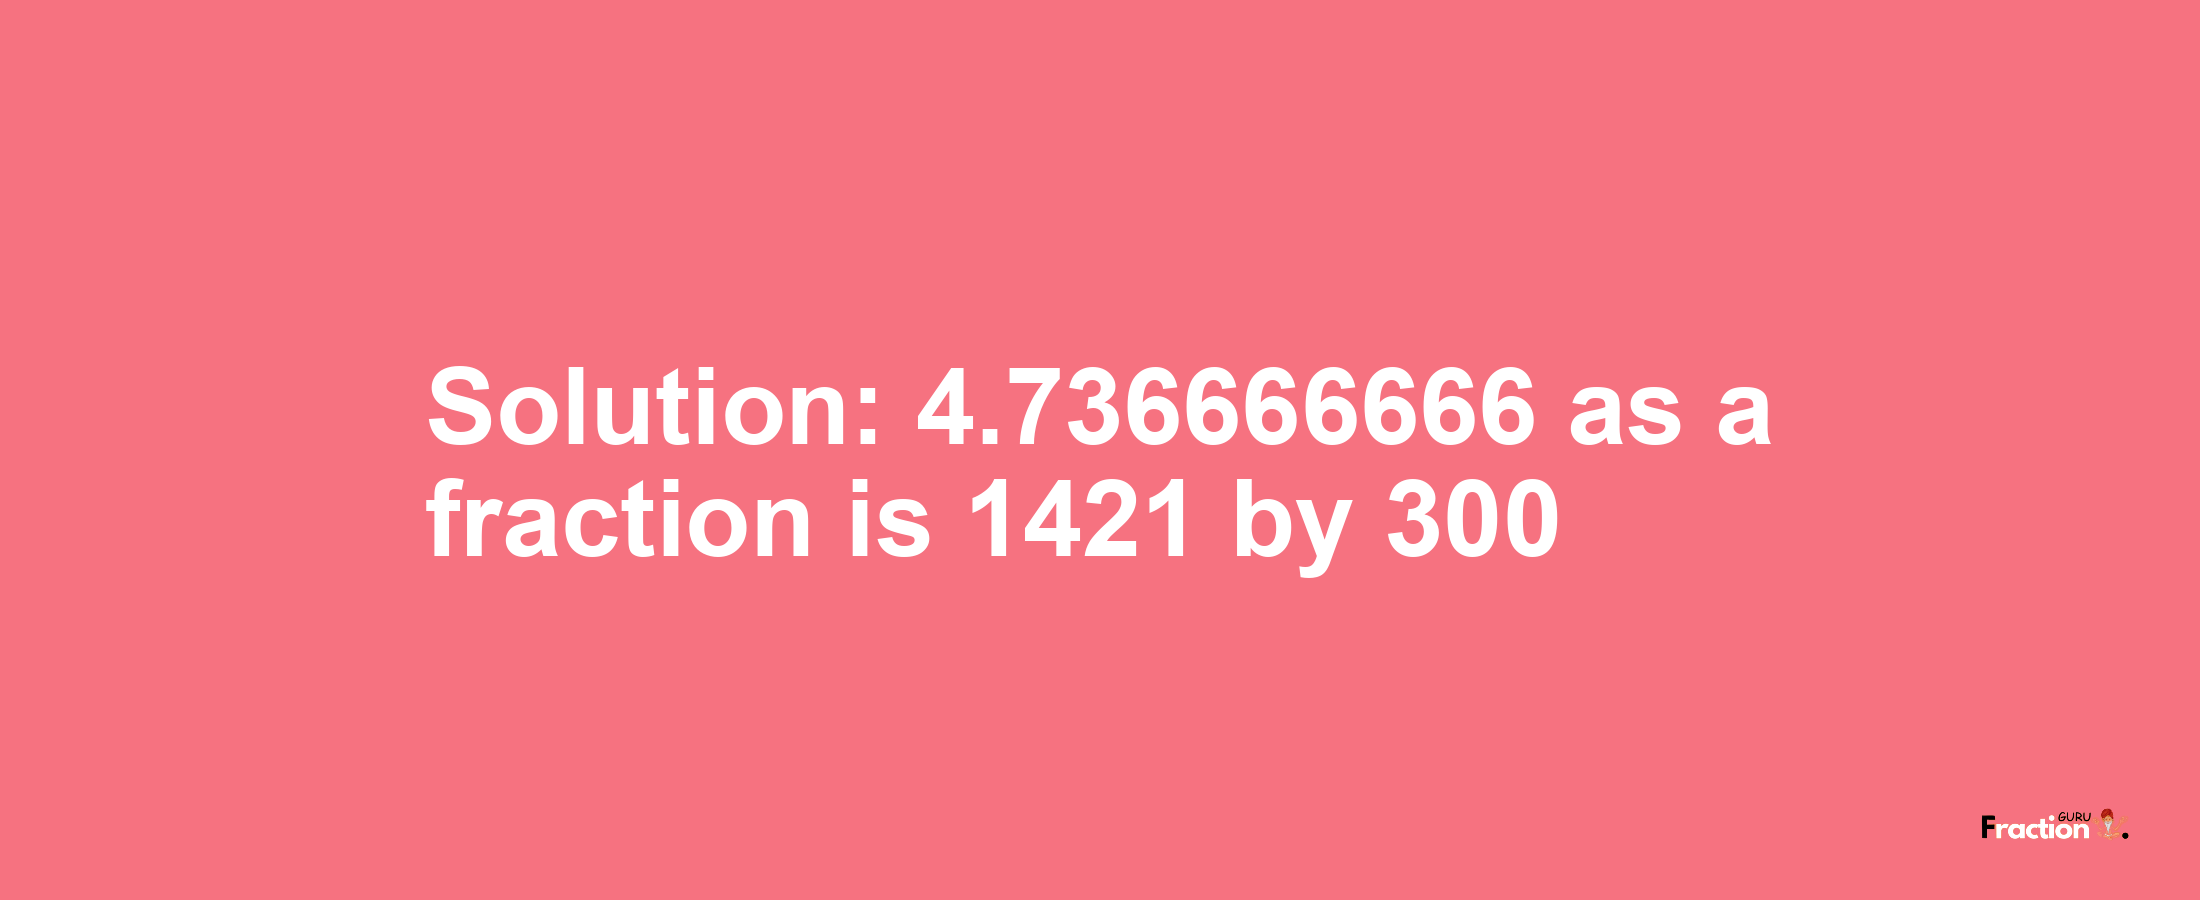 Solution:4.736666666 as a fraction is 1421/300